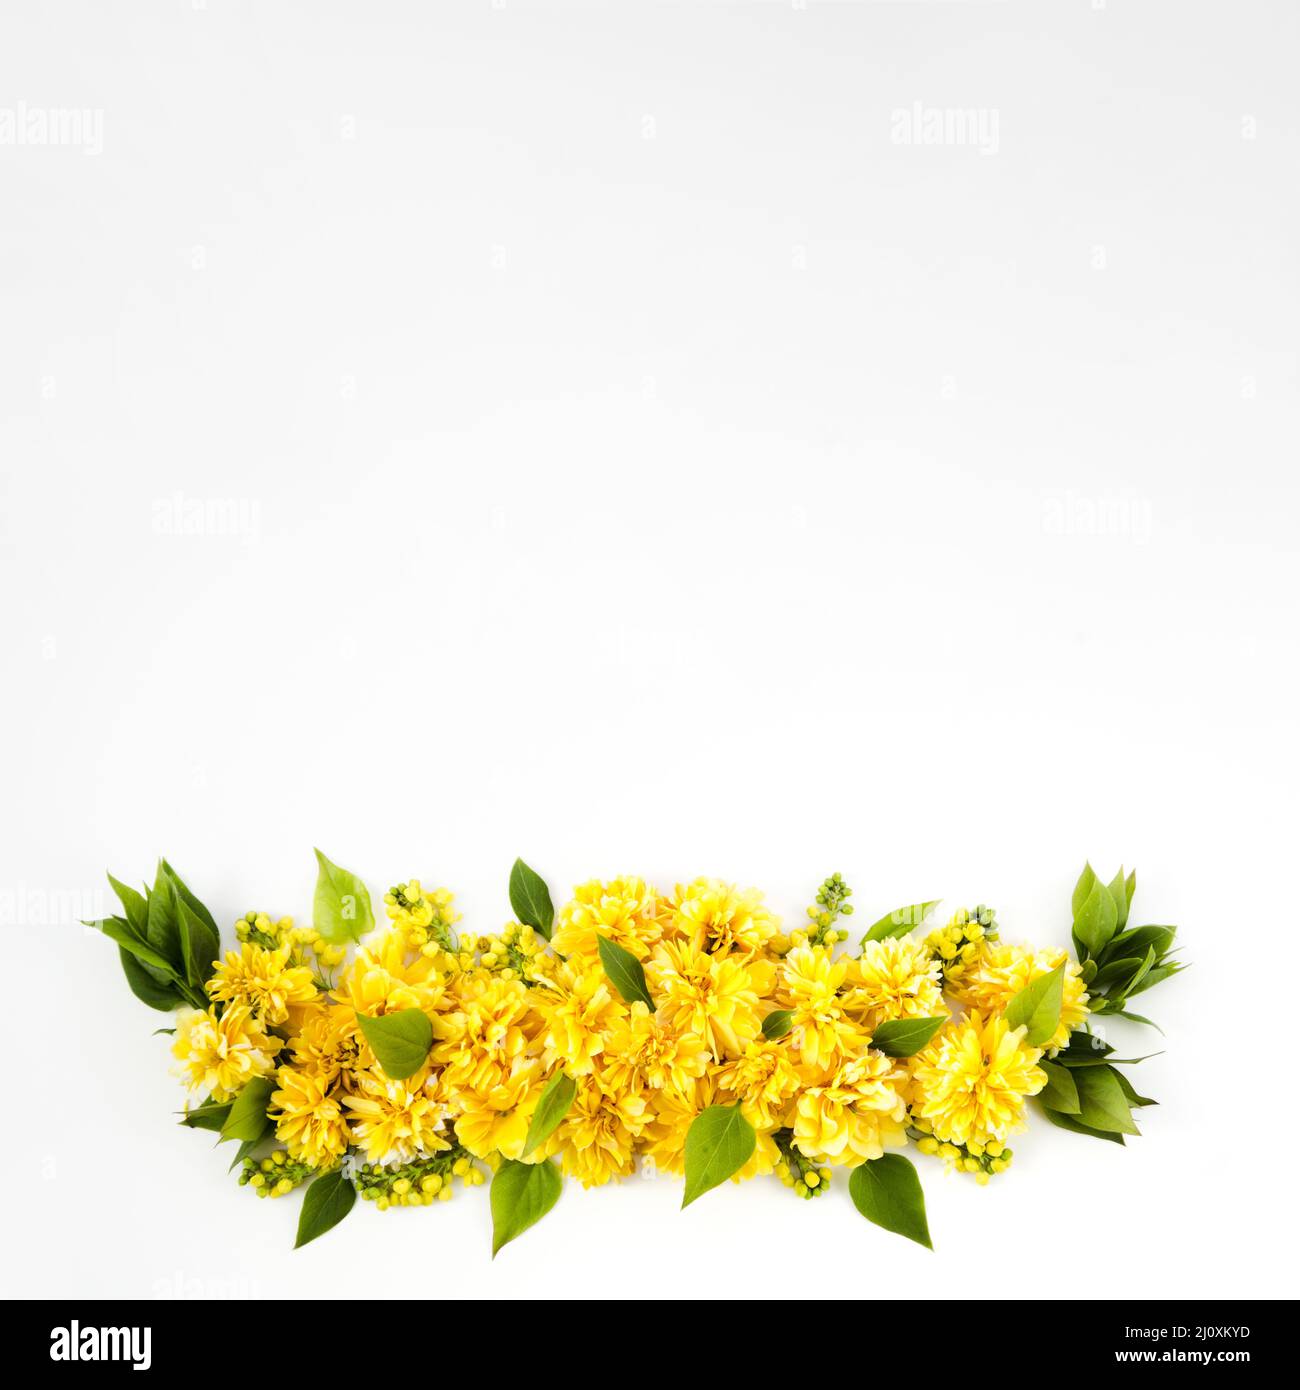 Floral garland 2. High quality photo Stock Photo